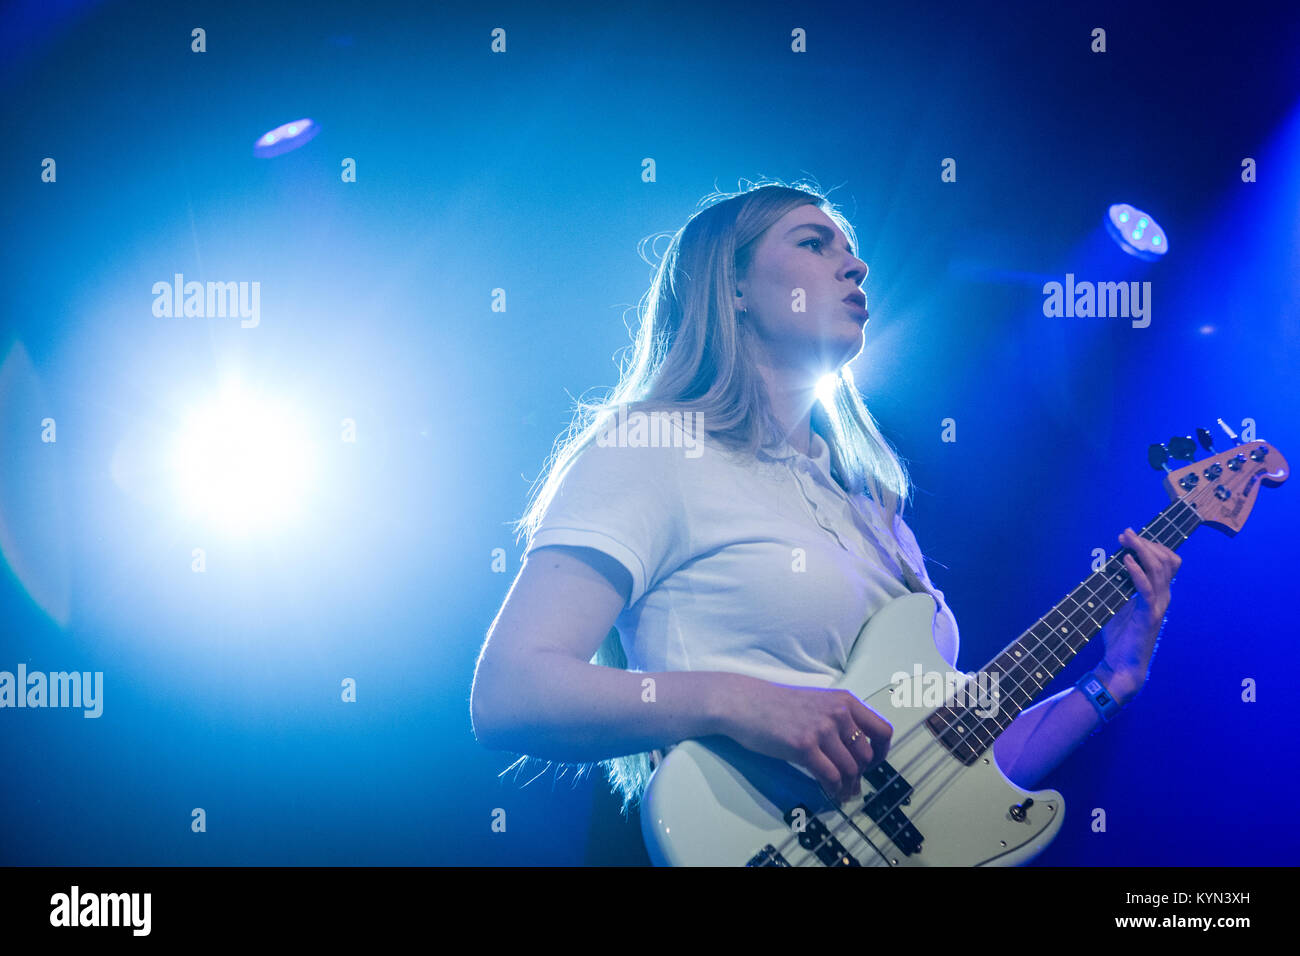 A girl performs stage during stock photography and images - Page 3 - Alamy